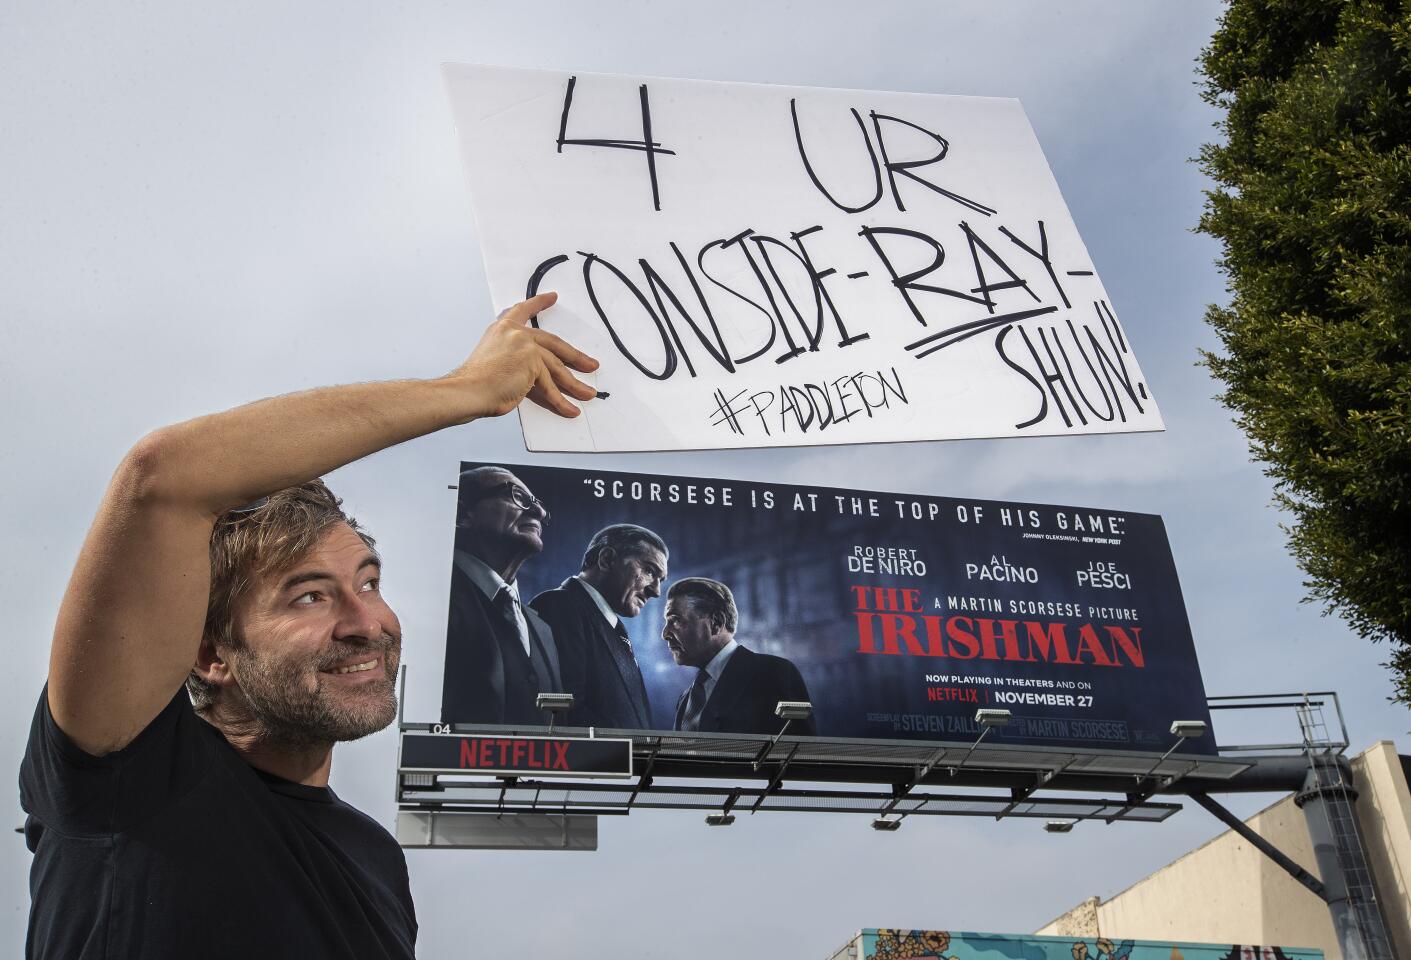 LOS ANGELES, CA-NOVEMBER 15, 2019: Actor Mark Duplass holds a sign above a billboard on Sunset Blvd, along the Sunset Strip in Los Angeles, promoting the movie, The Irishman, as he conducts a one-man awards campaign for his “Paddleton” co-star Ray Romano on November 15, 2019. Romano appeared in The Irishman. (Mel Melcon/Los Angeles Times)